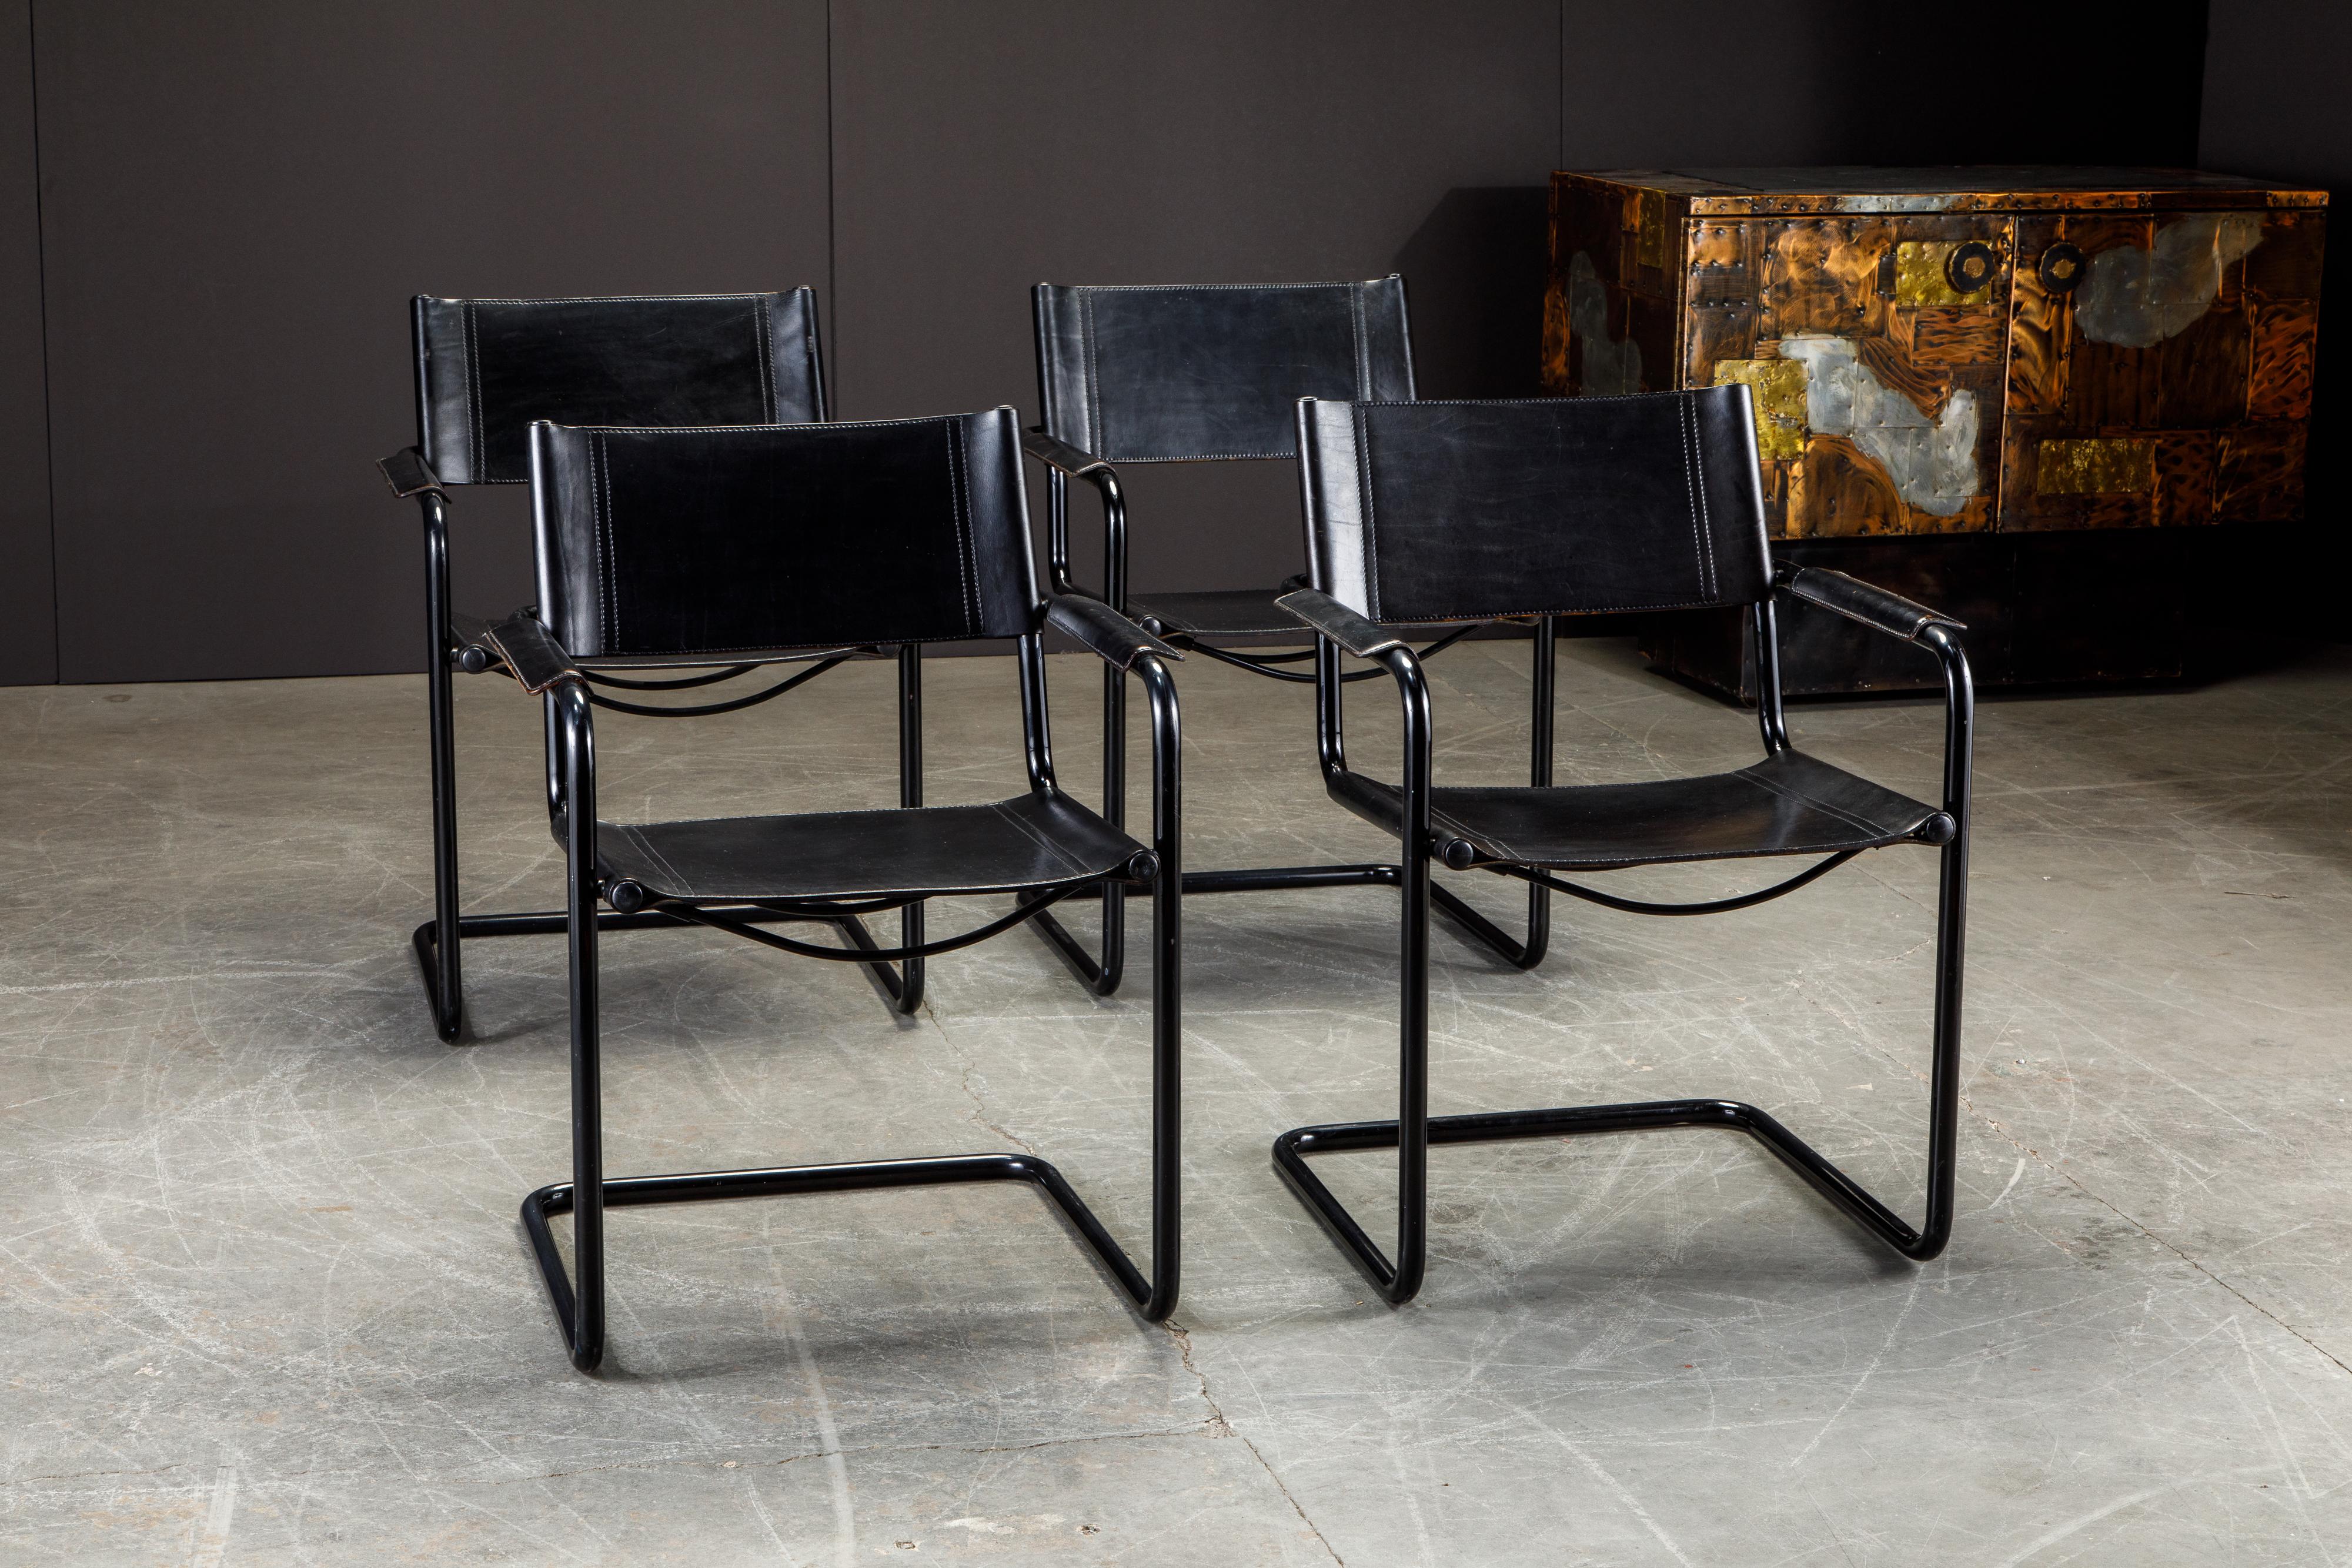 Timeless style and sophistication in this set of four iconic 